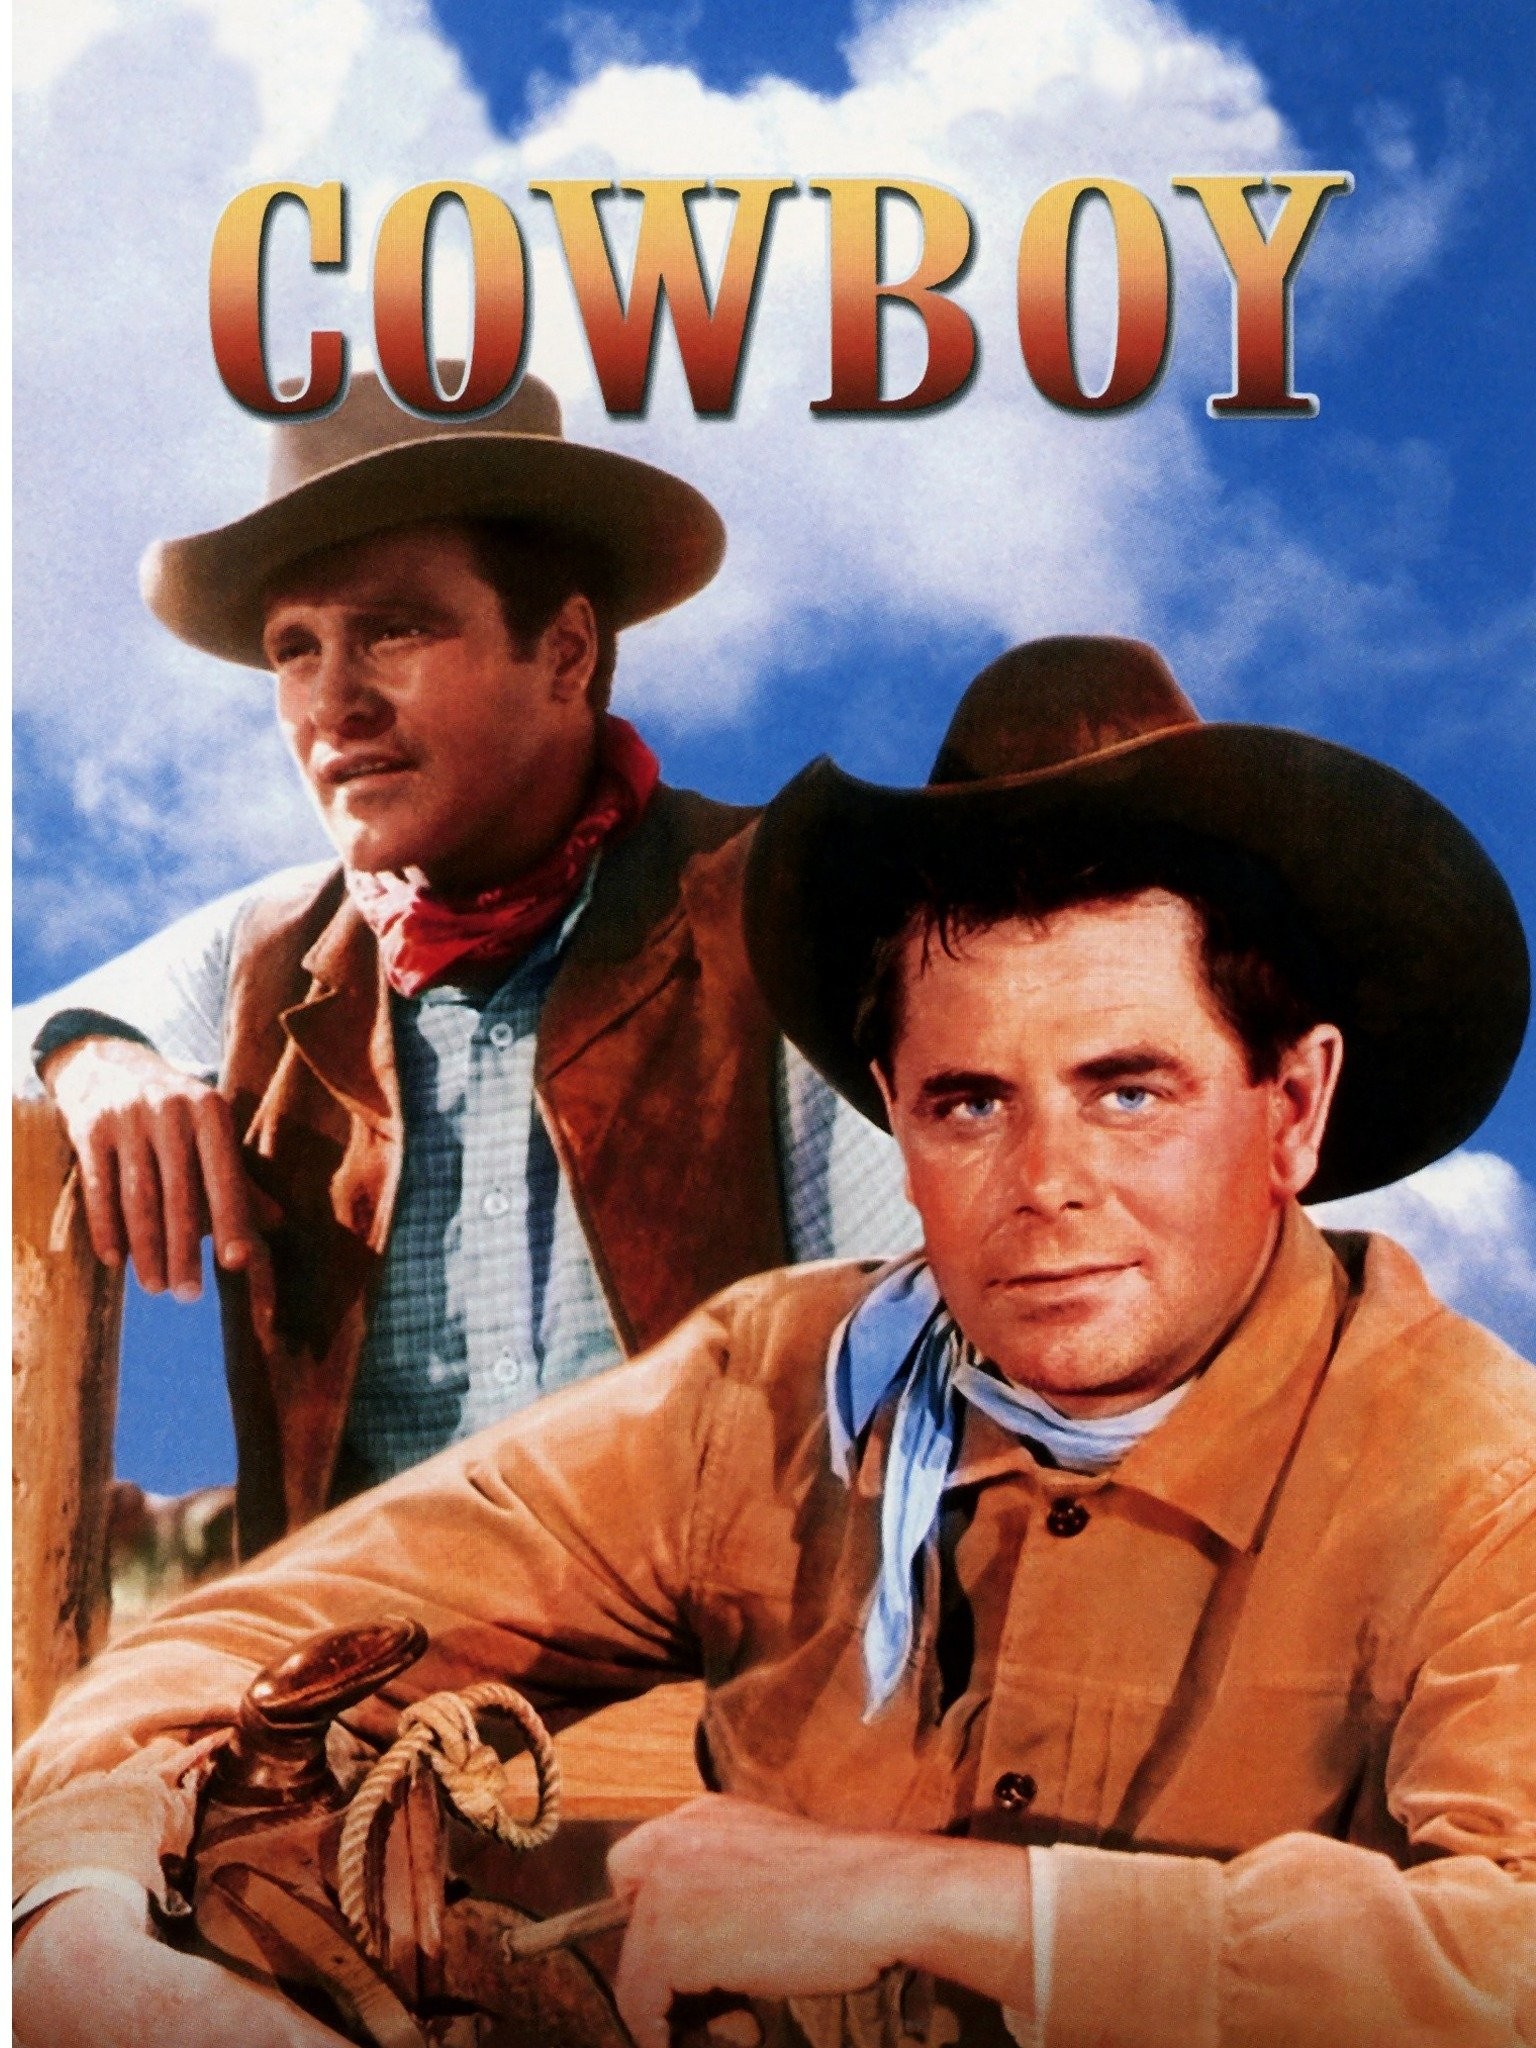 Cow-Boy the Movie added a new photo. - Cow-Boy the Movie